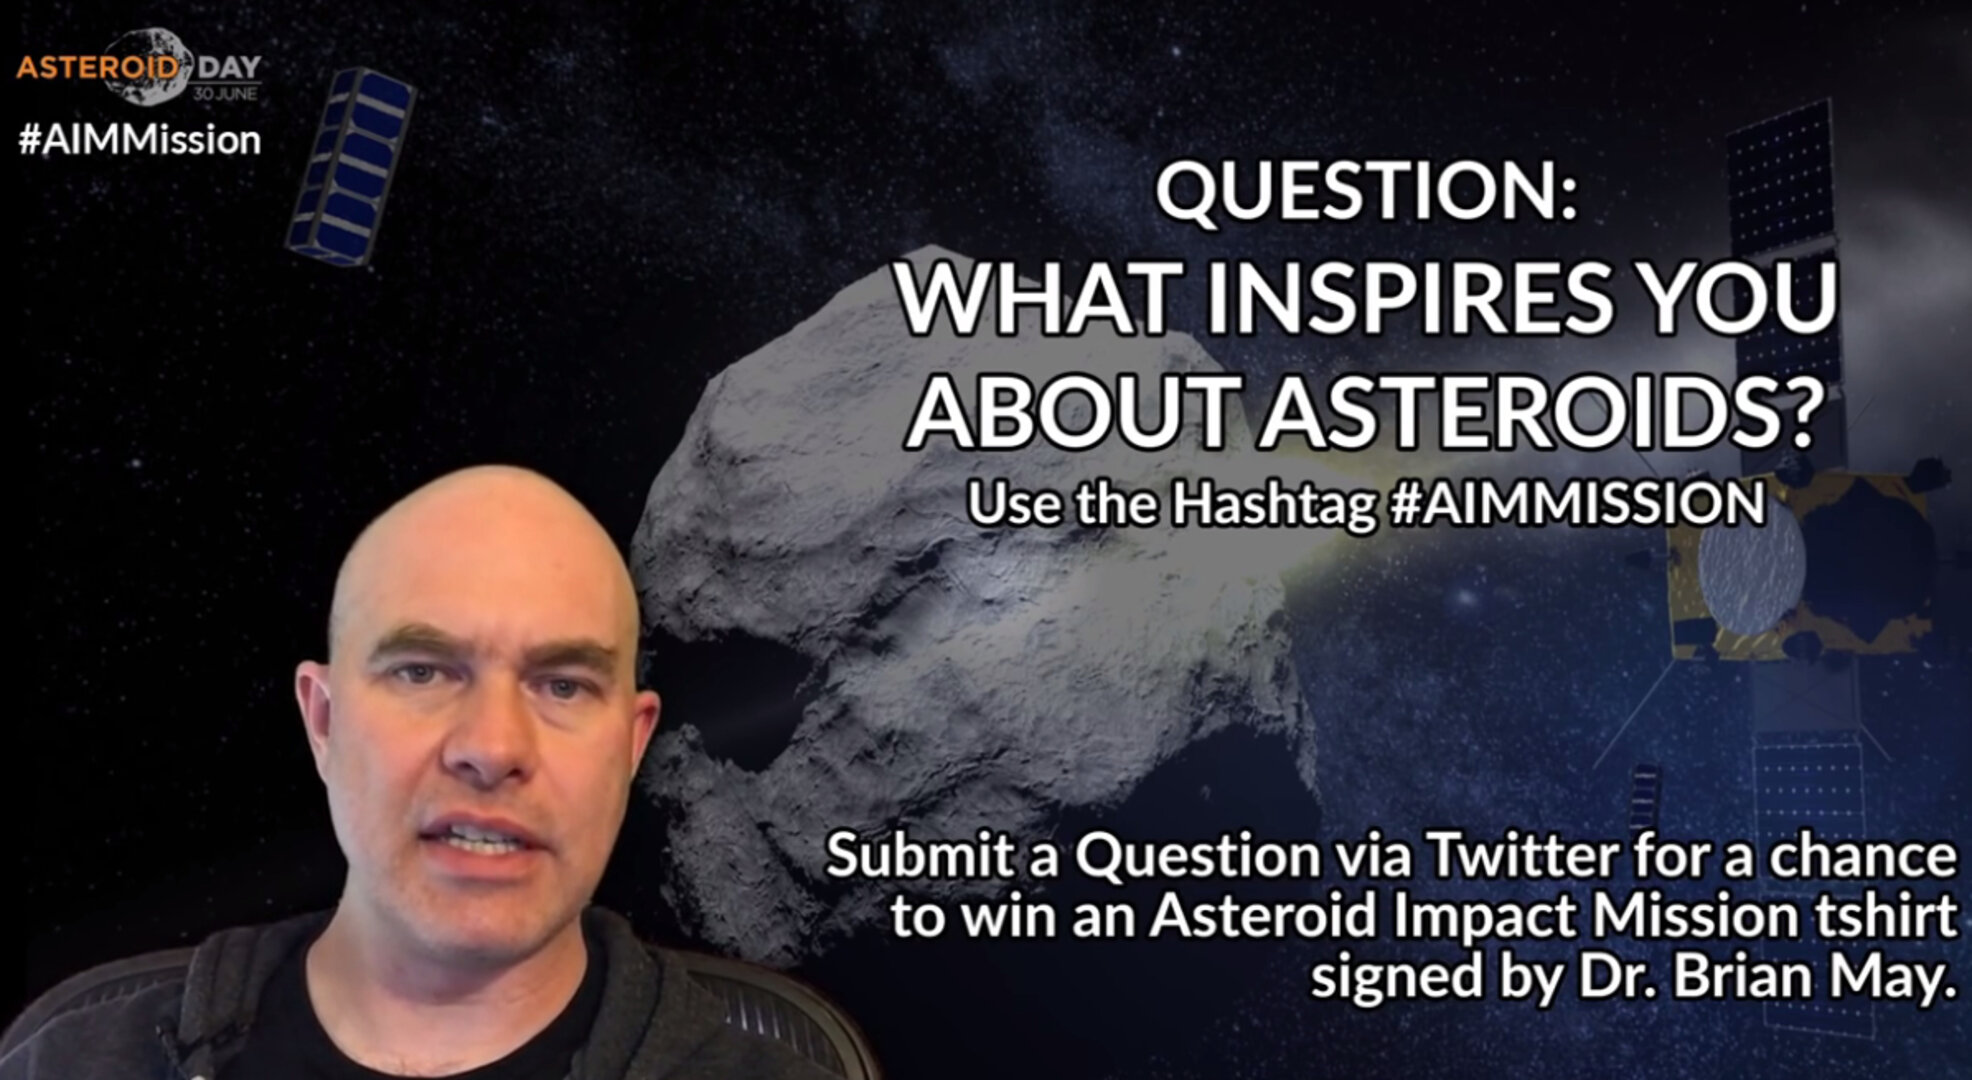 Asteroid Day TV launches new #AIMmission competition